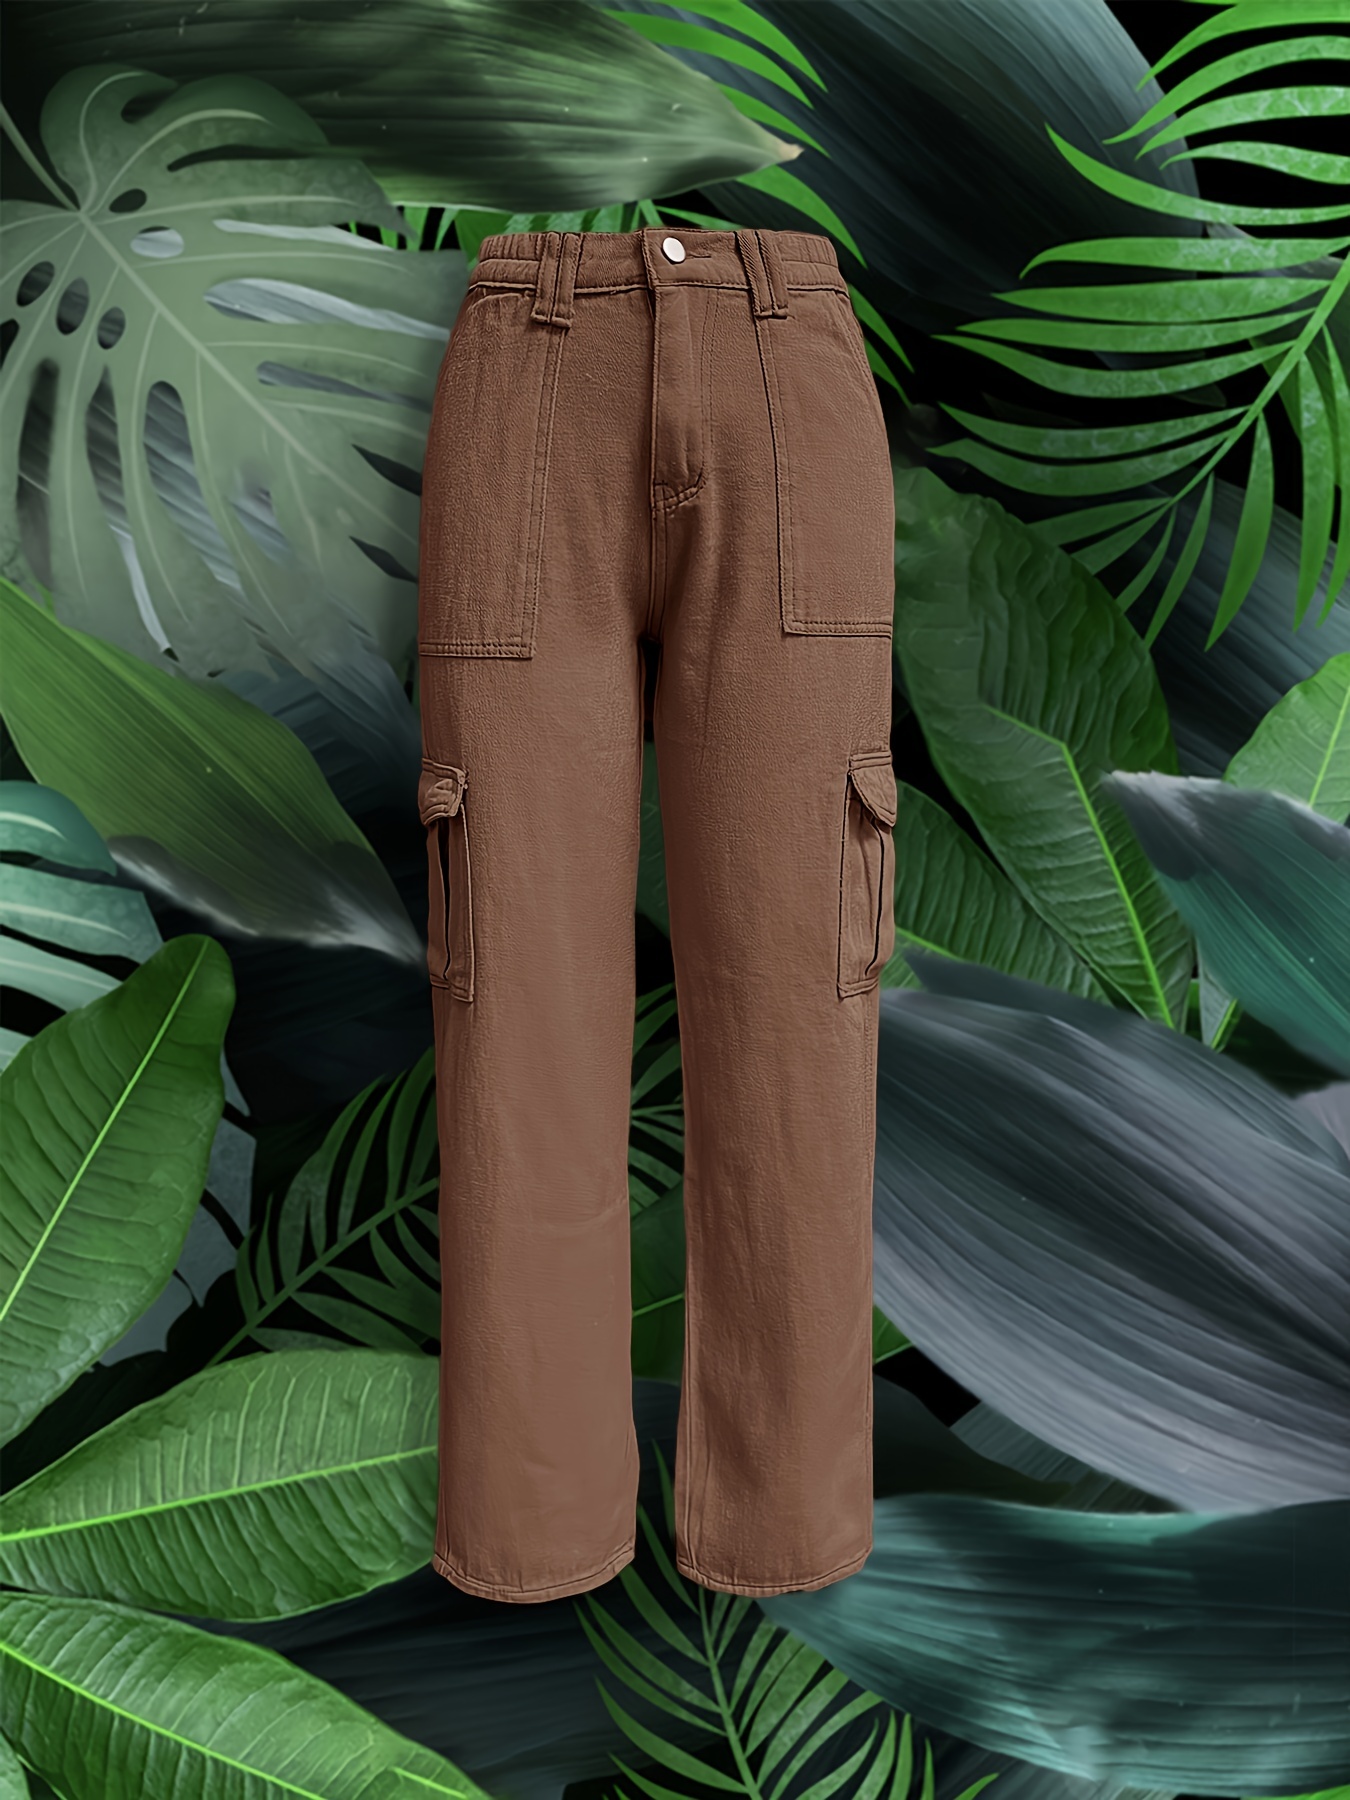 Women's Relaxed Fit Long Pants in Rust